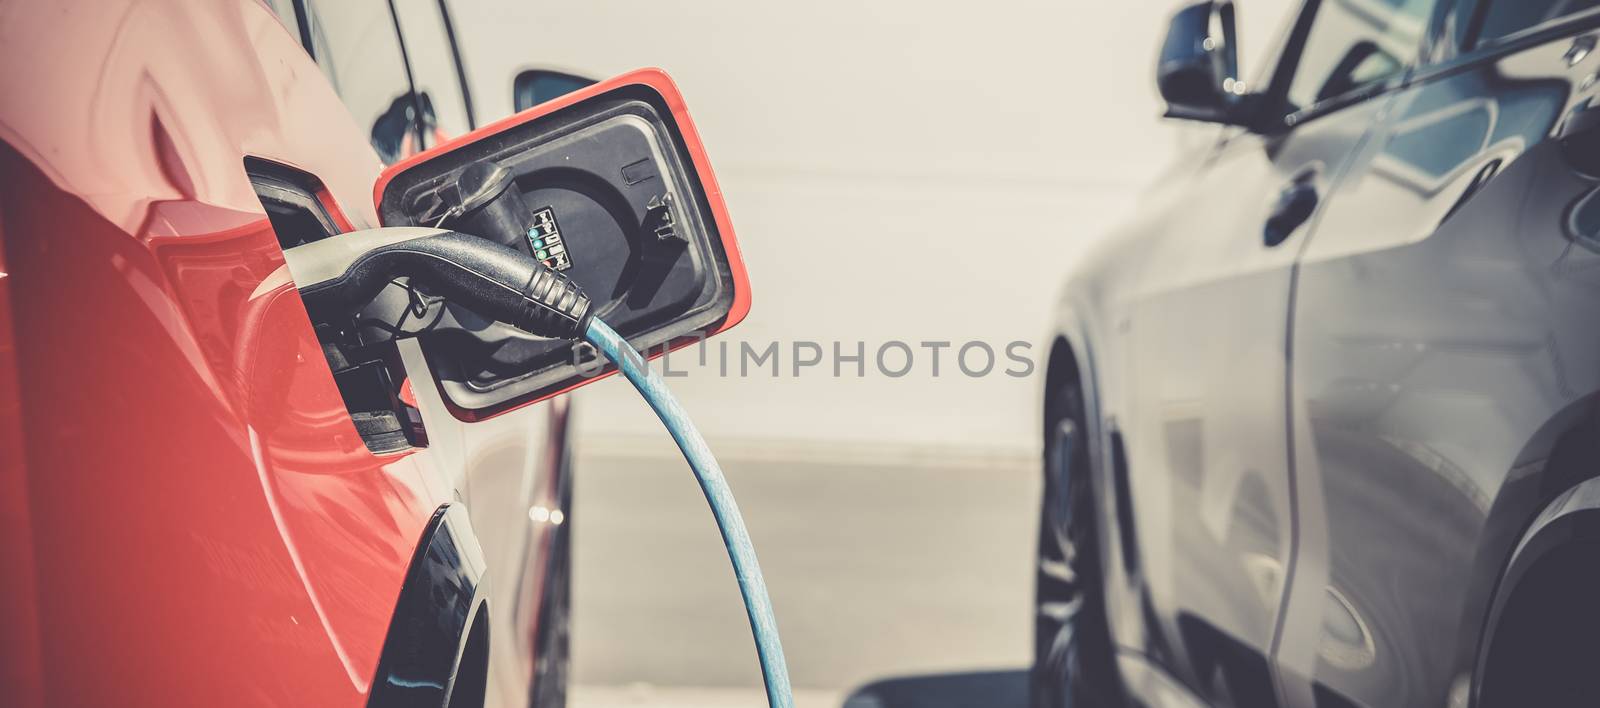 charging an ecological car with an electric motor at the charging station by Edophoto